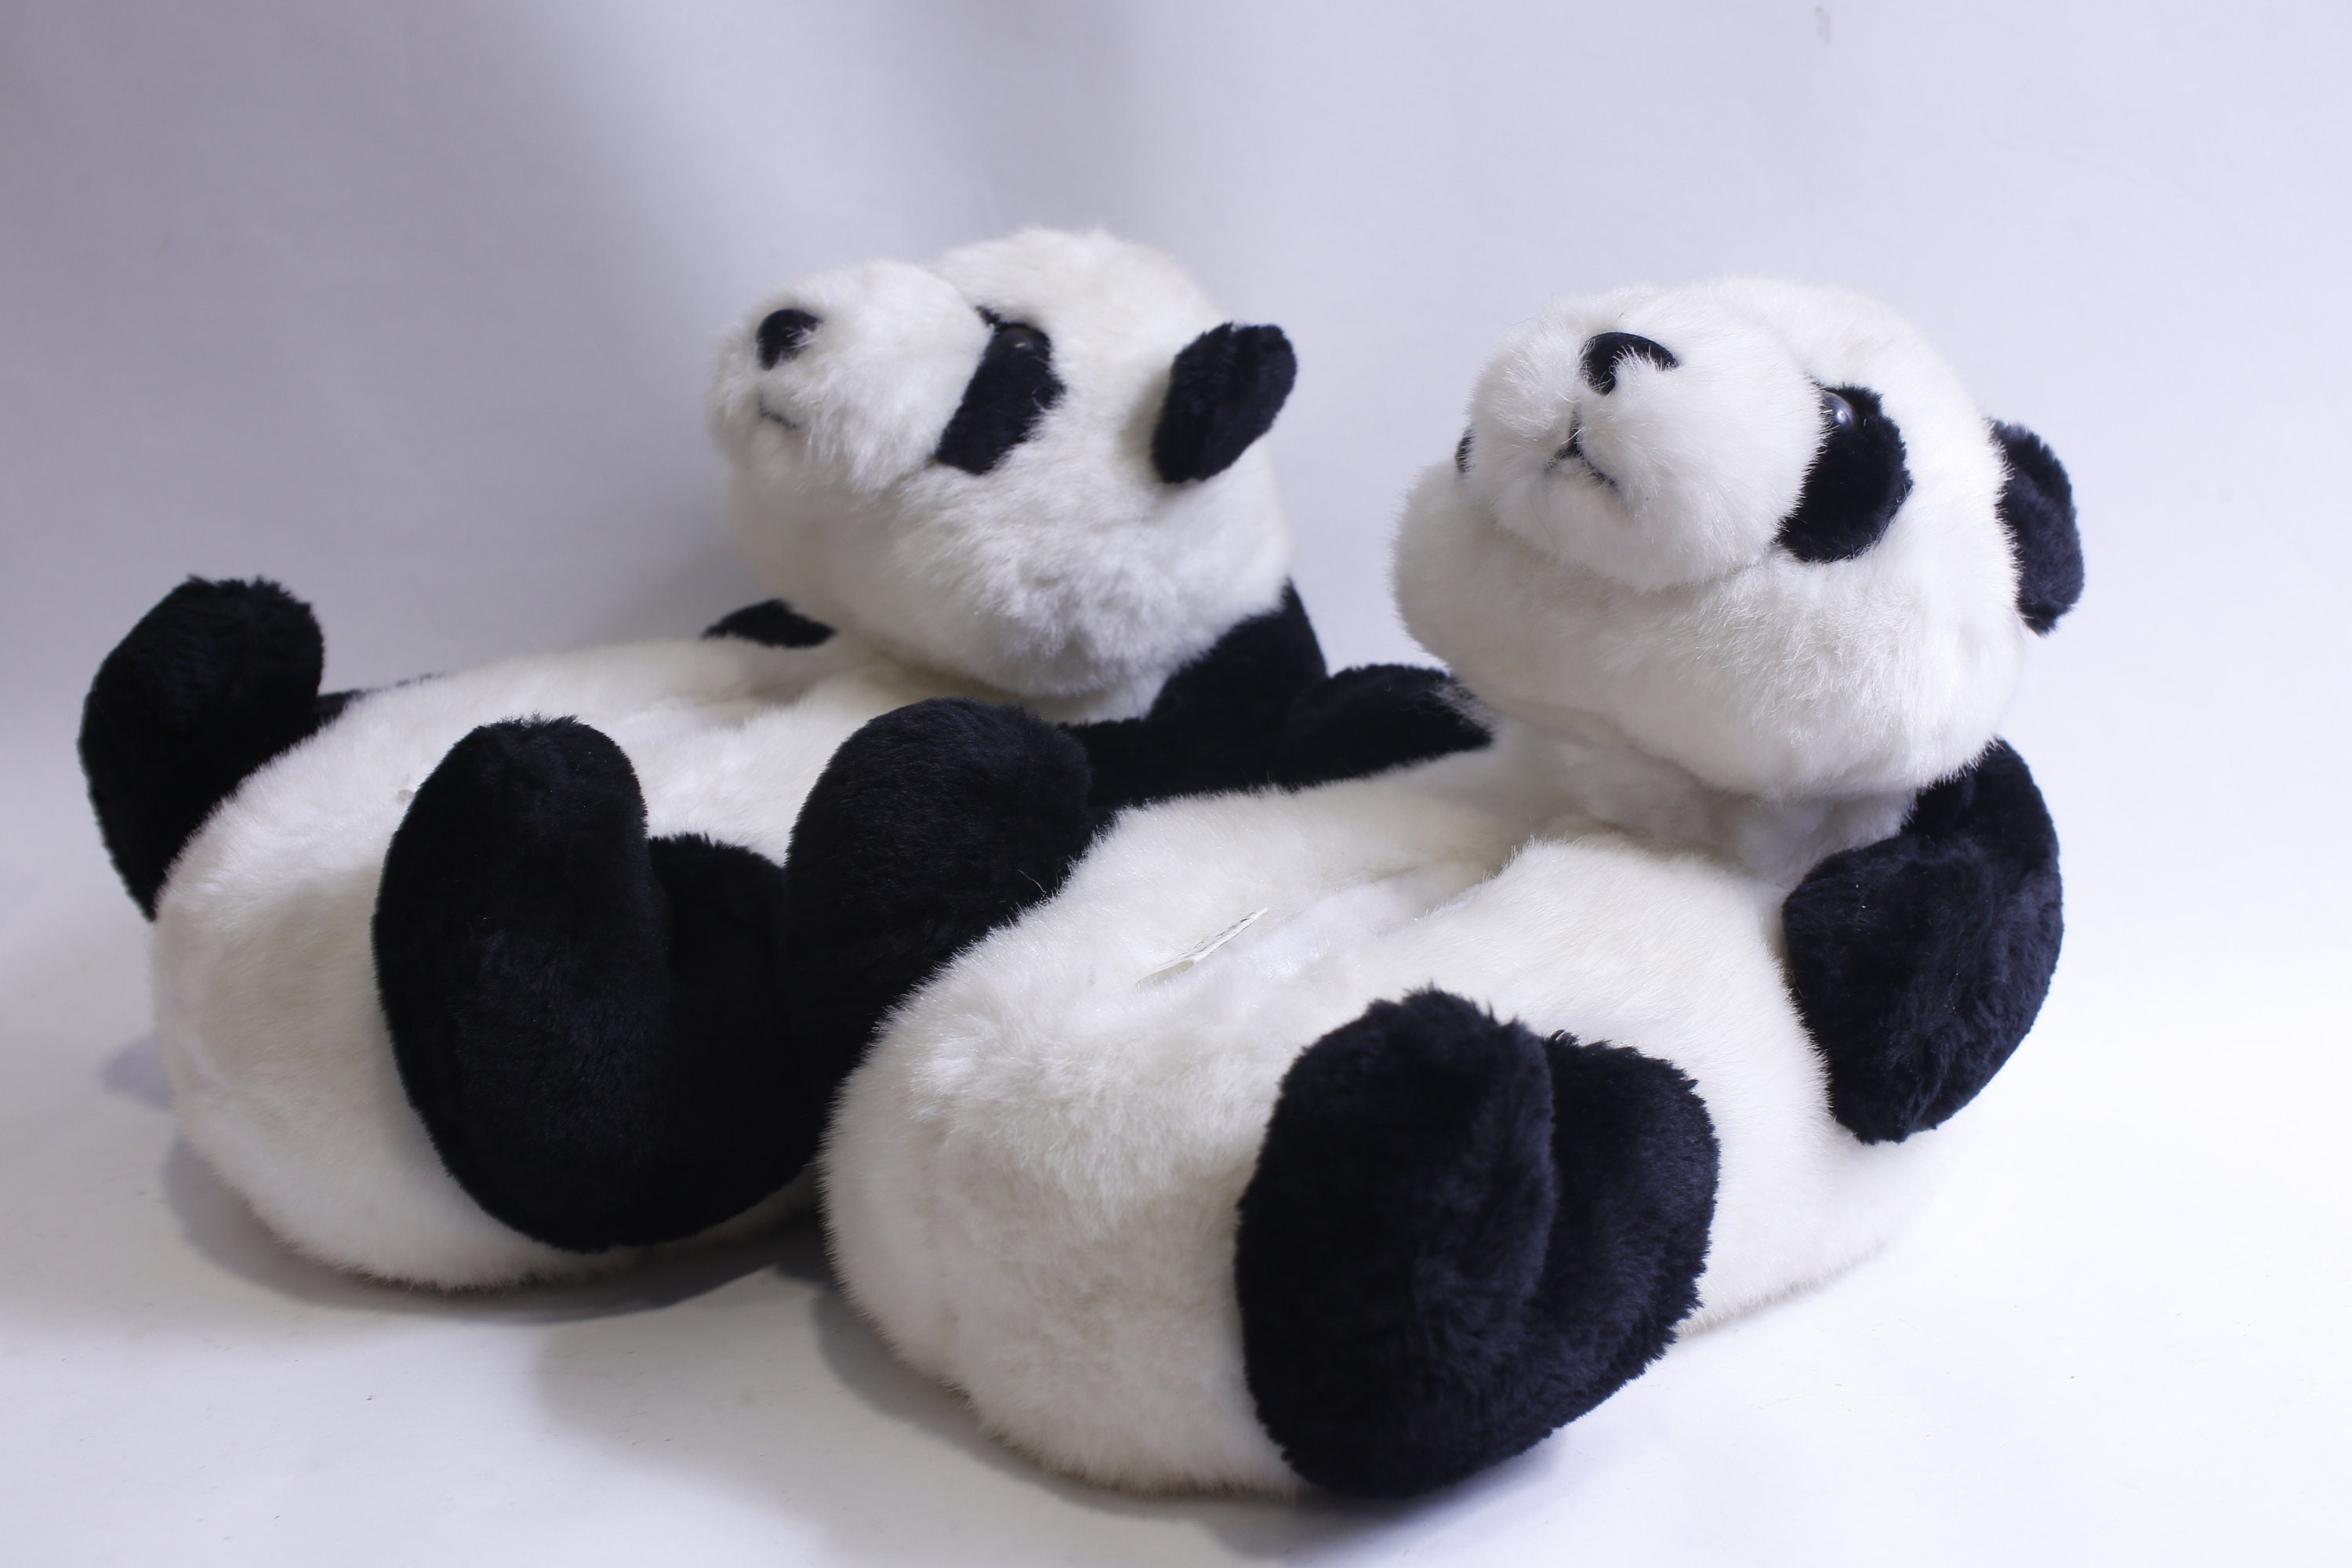 Buy Meadawgs® Plush Cartoon Panda Slippers Warm Cozy Novelty Slippers Funny  House Shoes (White) at Amazon.in